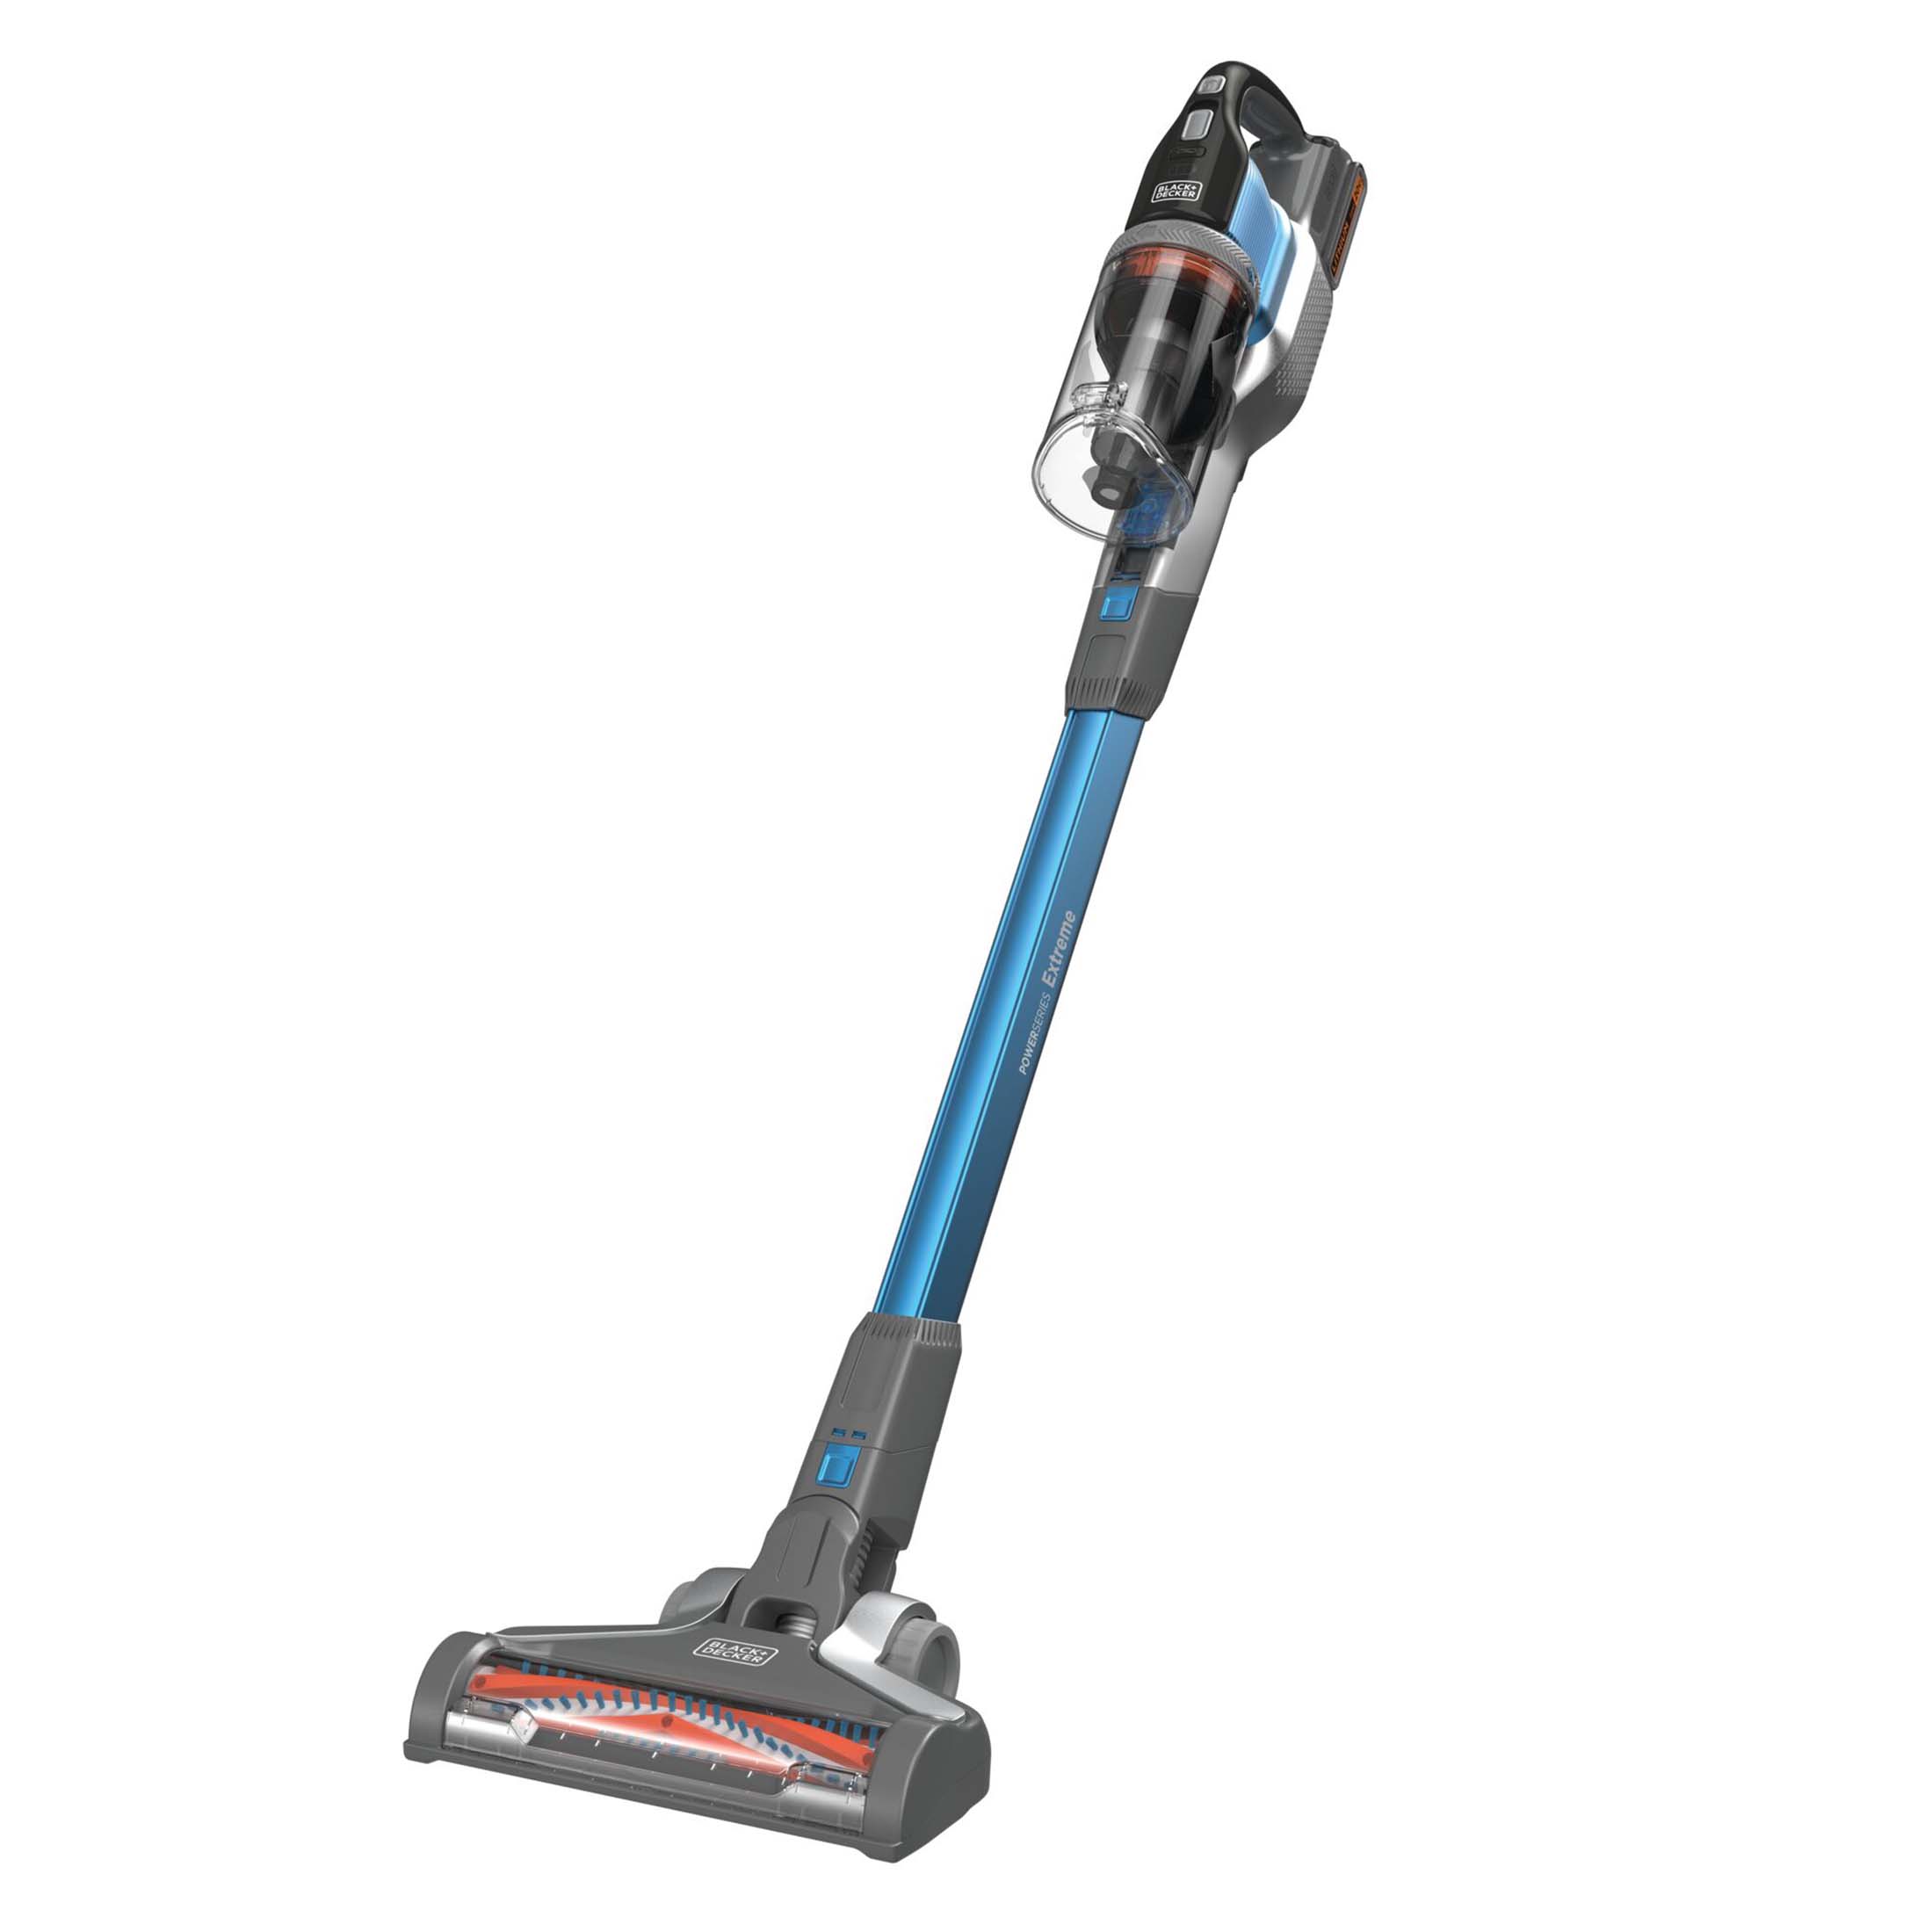 BLACK+DECKER Power Series Extreme Cordless Stick Vacuum Cleaner, BSV2020G - image 1 of 10